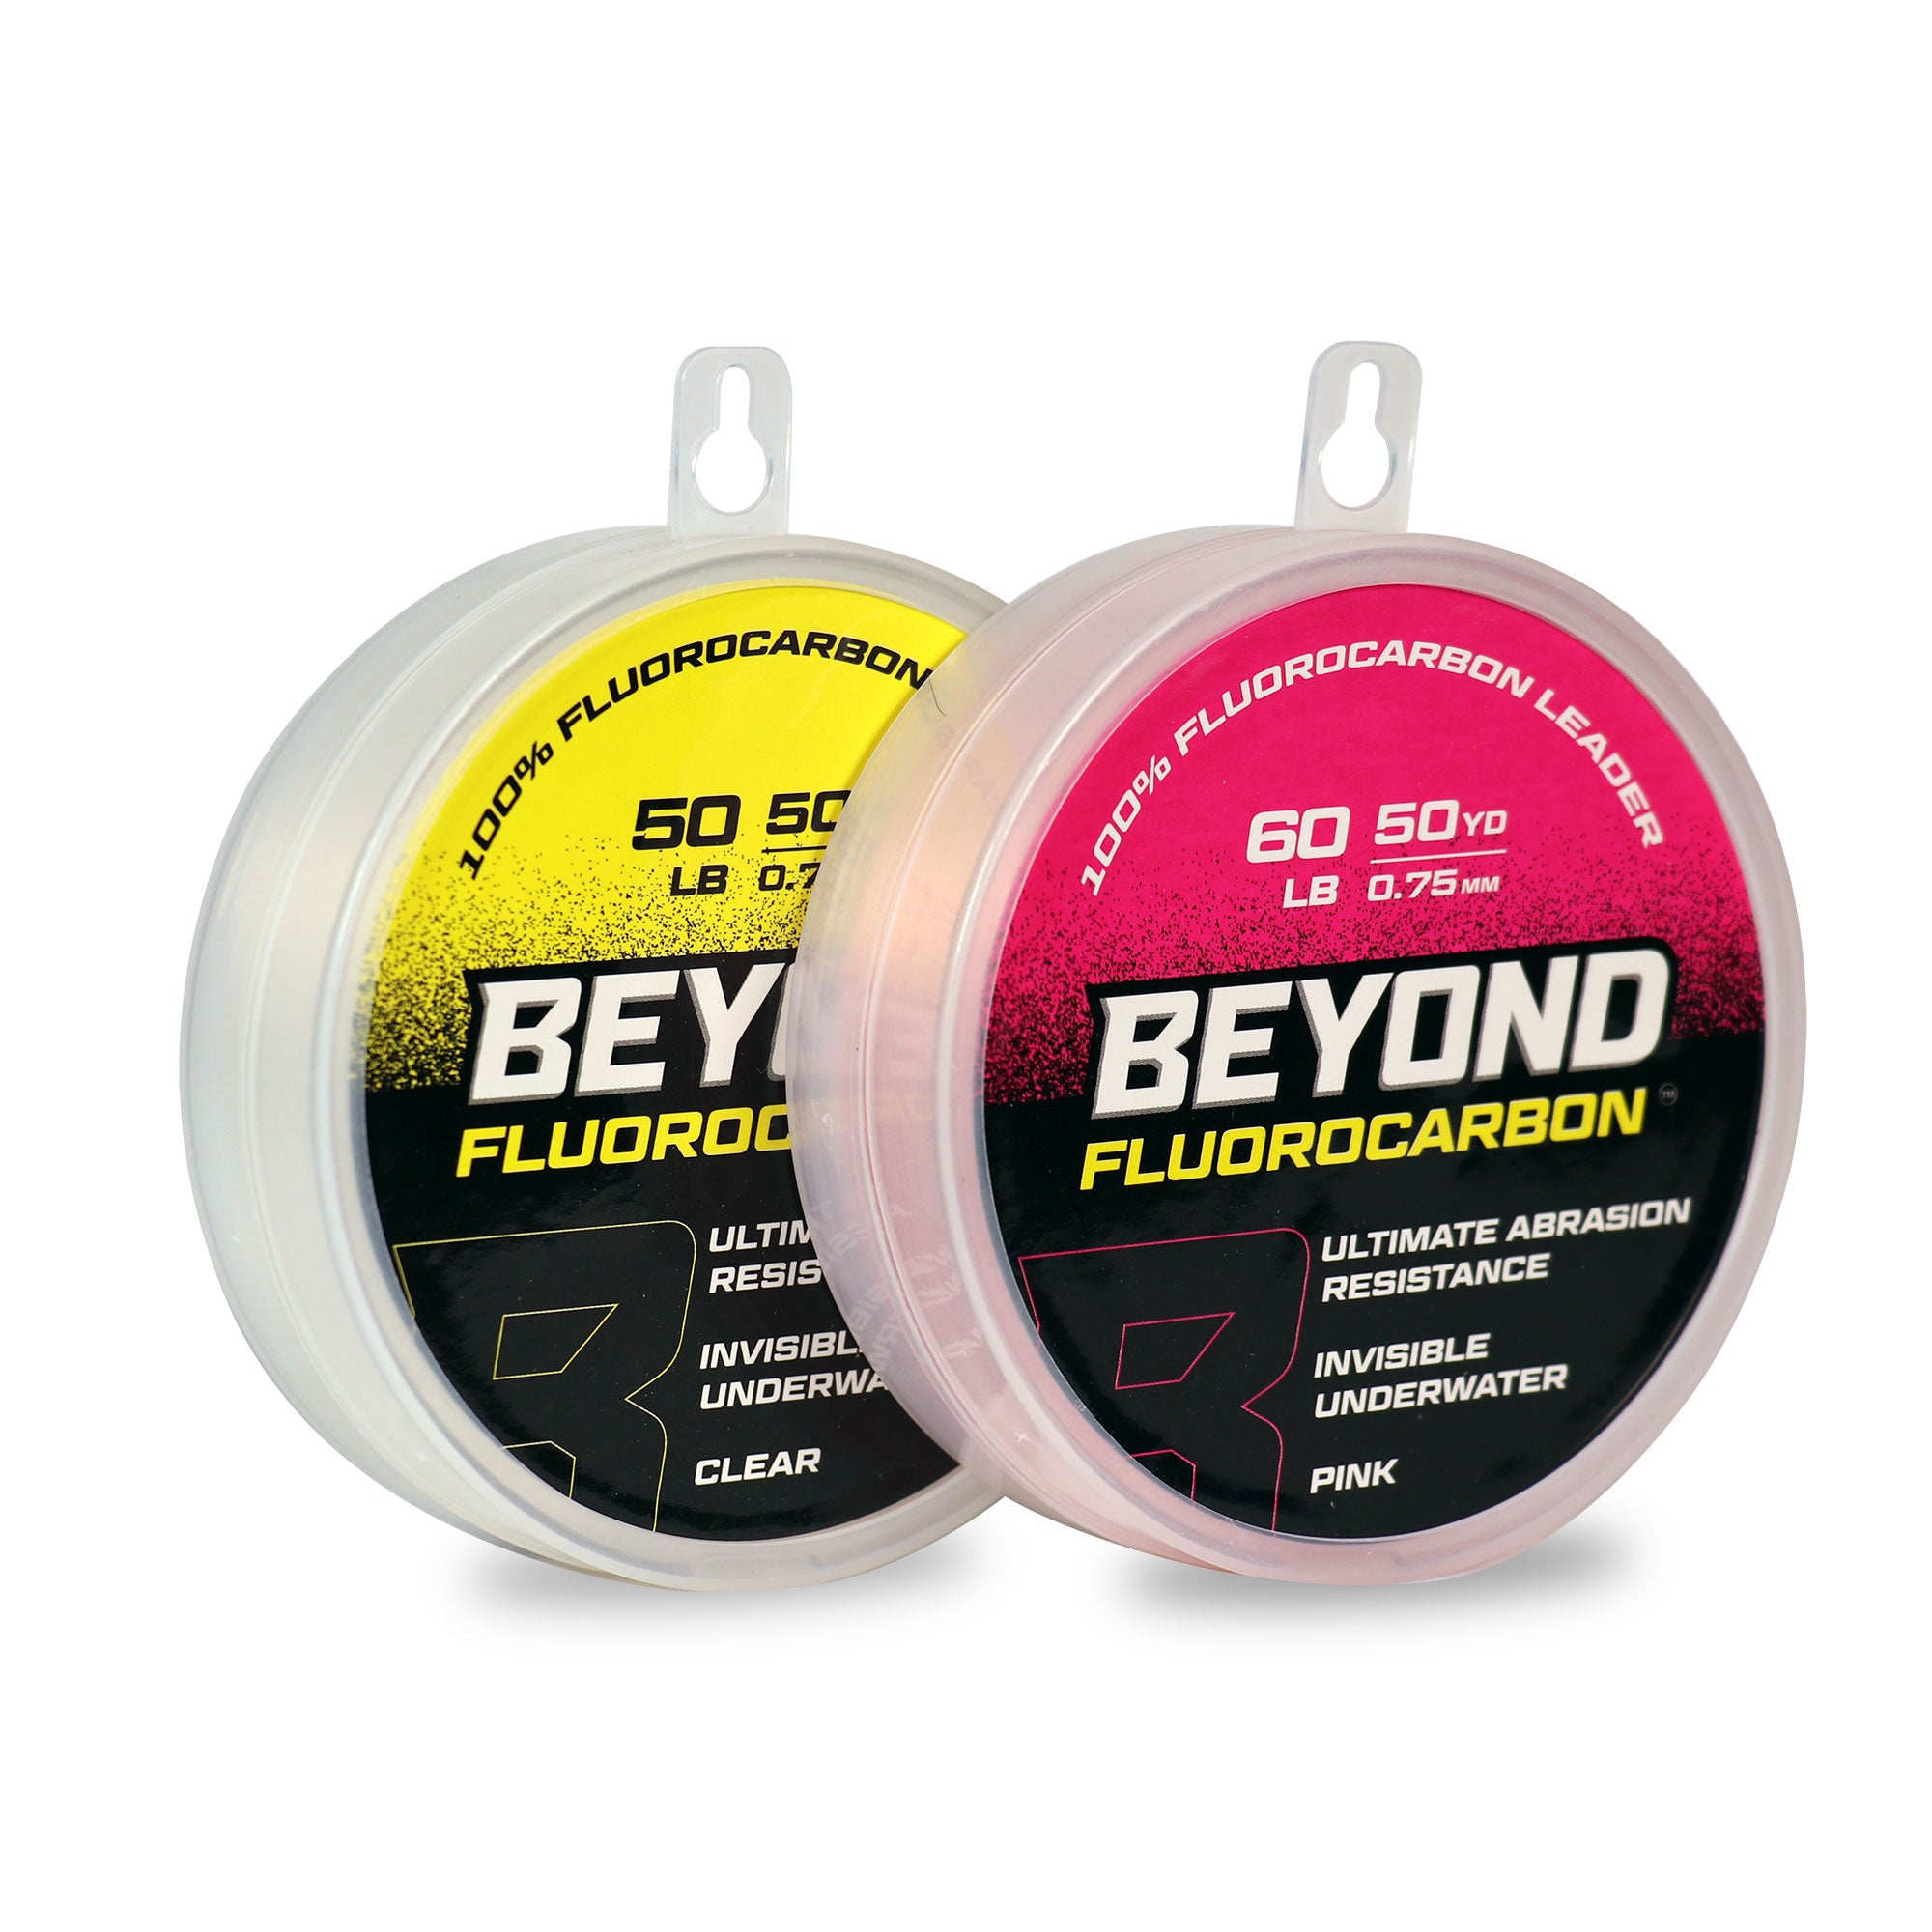 Beyond Fluorocarbon Leader Material 50YD - Pink Or Clear - Beyond